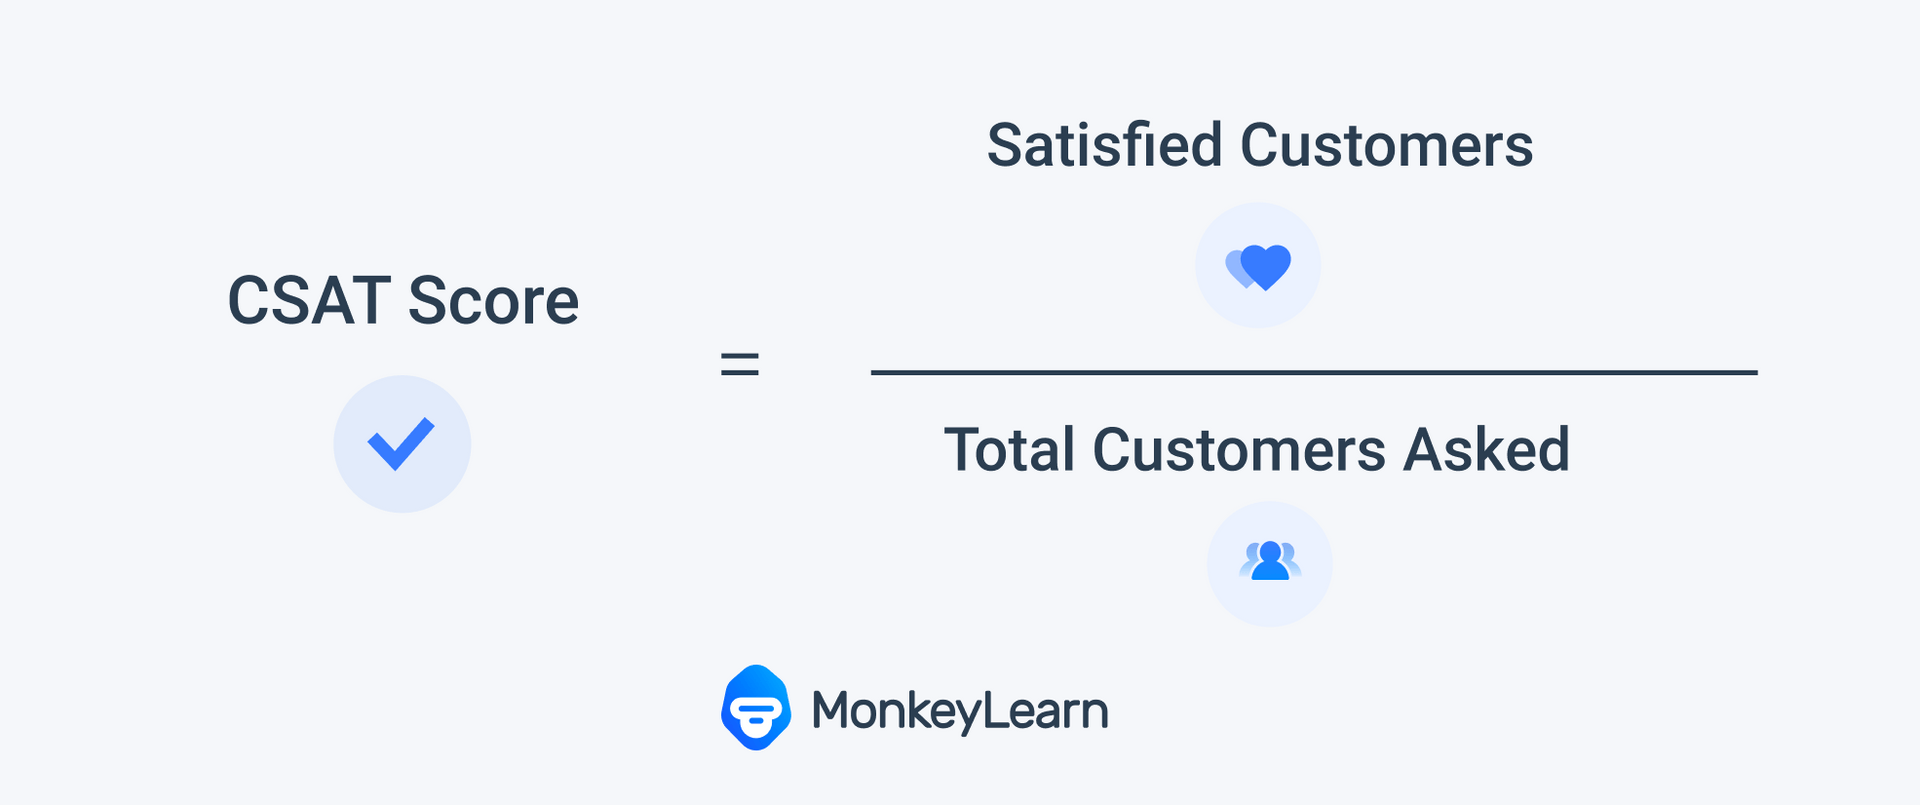 The CSAT calculation. CSAT score or % is equal to the number of Satisfied customers divided by the total customers asked.